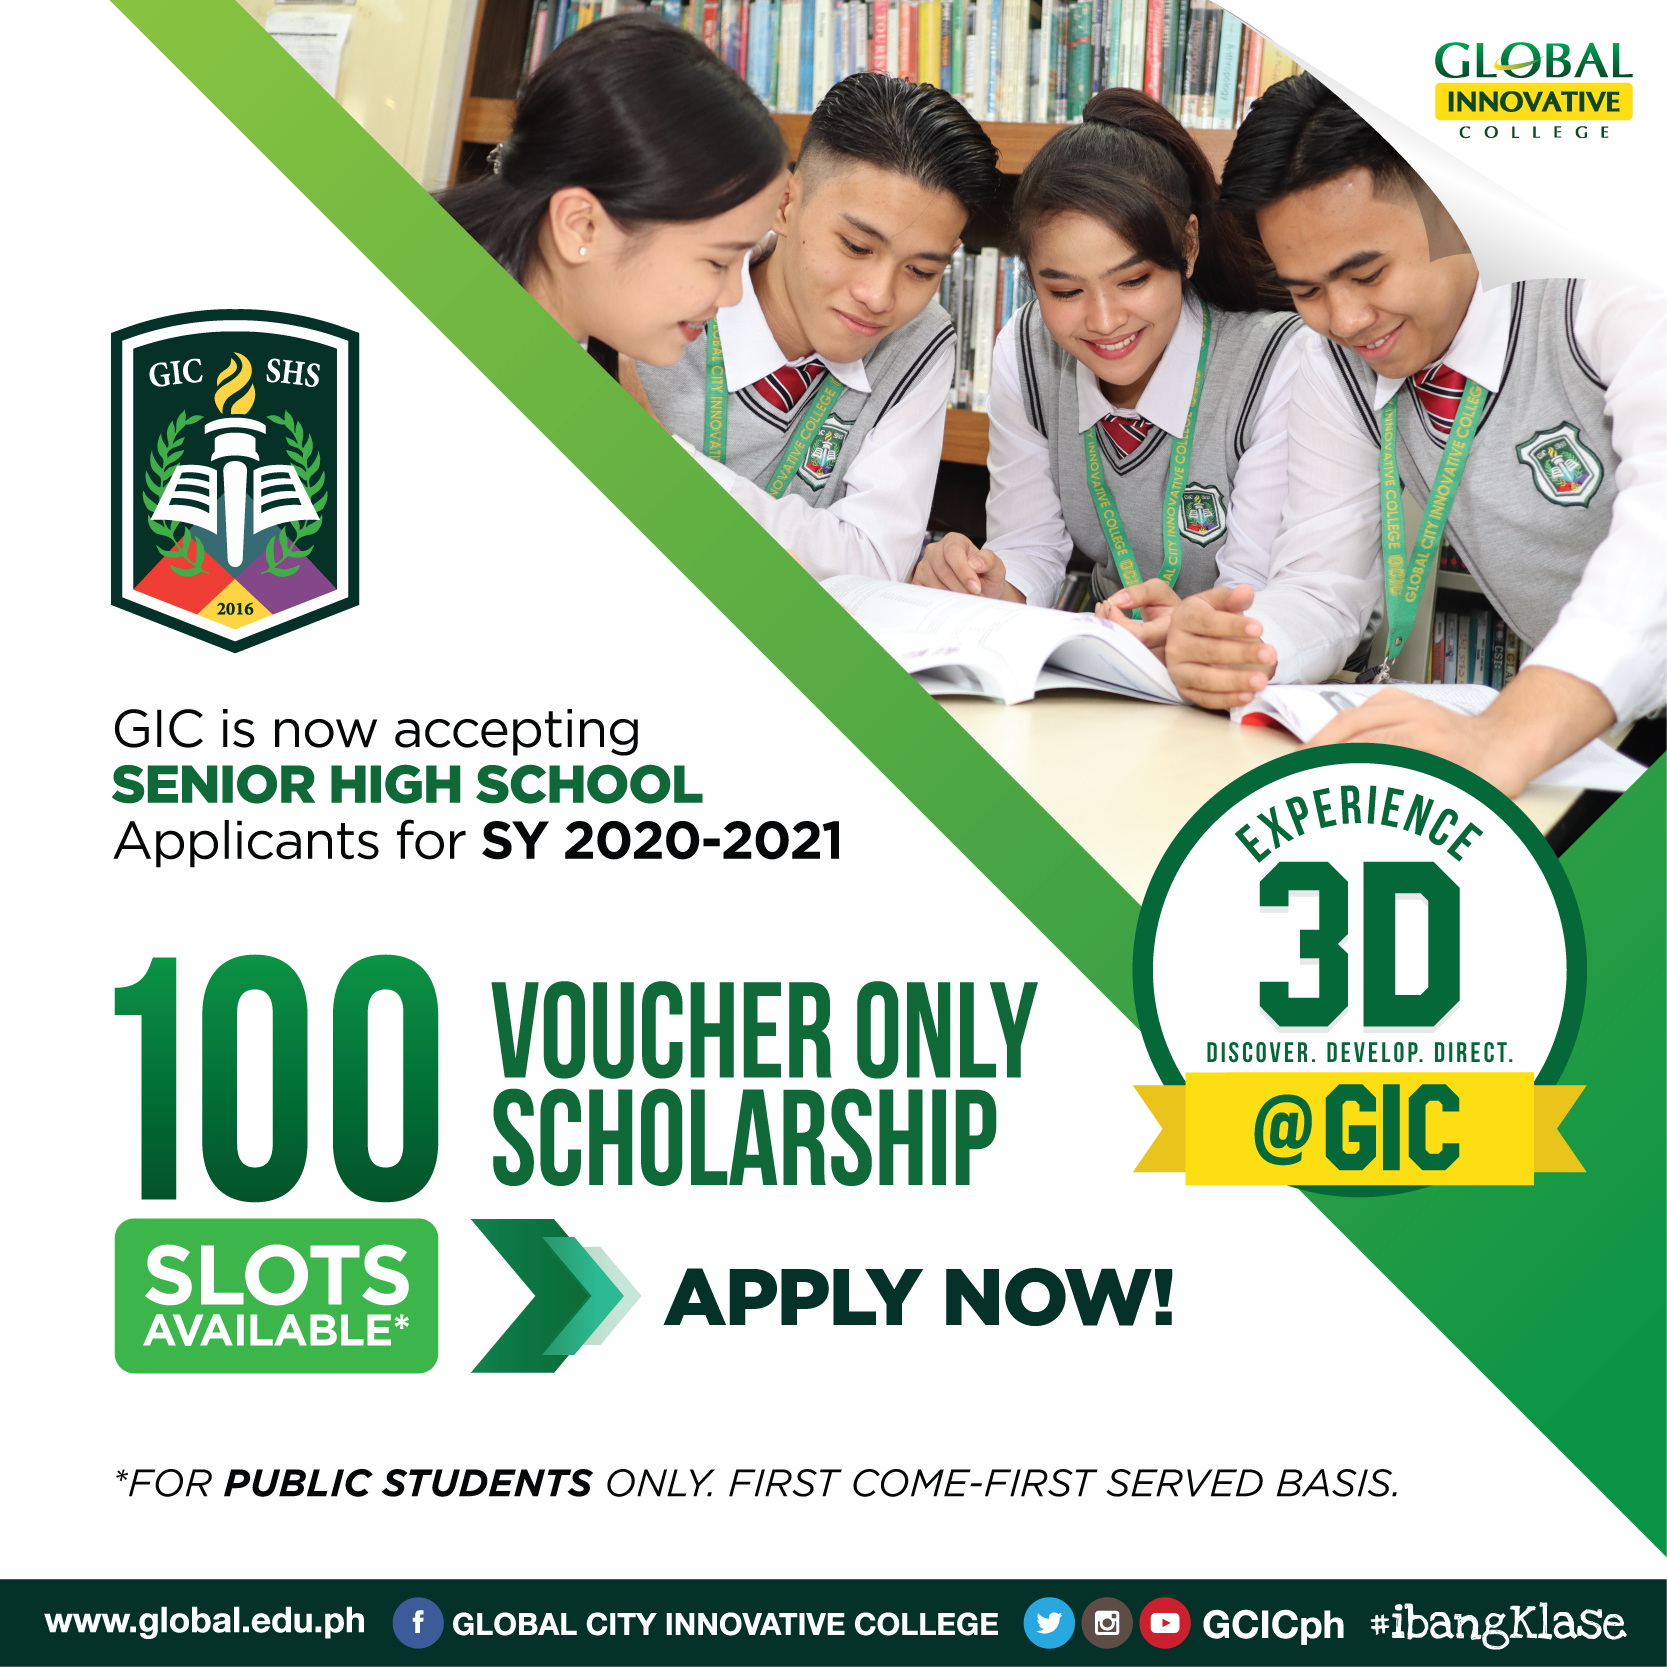 BE A GIC SCHOLAR FOR SENIOR HIGH  Global Innovative College Senior High School is opening 100 VOUCHER ONLY SCHOLARSHIP SLOTS (No Top Up) for qualified graduates from the Public Schools.  Don't miss the chance to experience 21st Century and innovative education that will help you develop the needed skills to be future ready. Allow us to transform your lives through GIC's 3D education program. Discover your fullest potential and stand out from the rest.  *First come-first served basis.  Visit us now to reserve your slot! We are open Monday to Friday between 8:00AM to 4:00PM. Our campus is located at PET Plans Tower Building 444 EDSA Makati City (after San Carlos Seminary before Rockwell).  For inquiries and more details, call 8882-4242 to 45 or 0917-496-2888 (Globe), 0918-924-7810 (Smart). GLOBAL INNOVATIVE COLLEGE SCHOLARSHIP